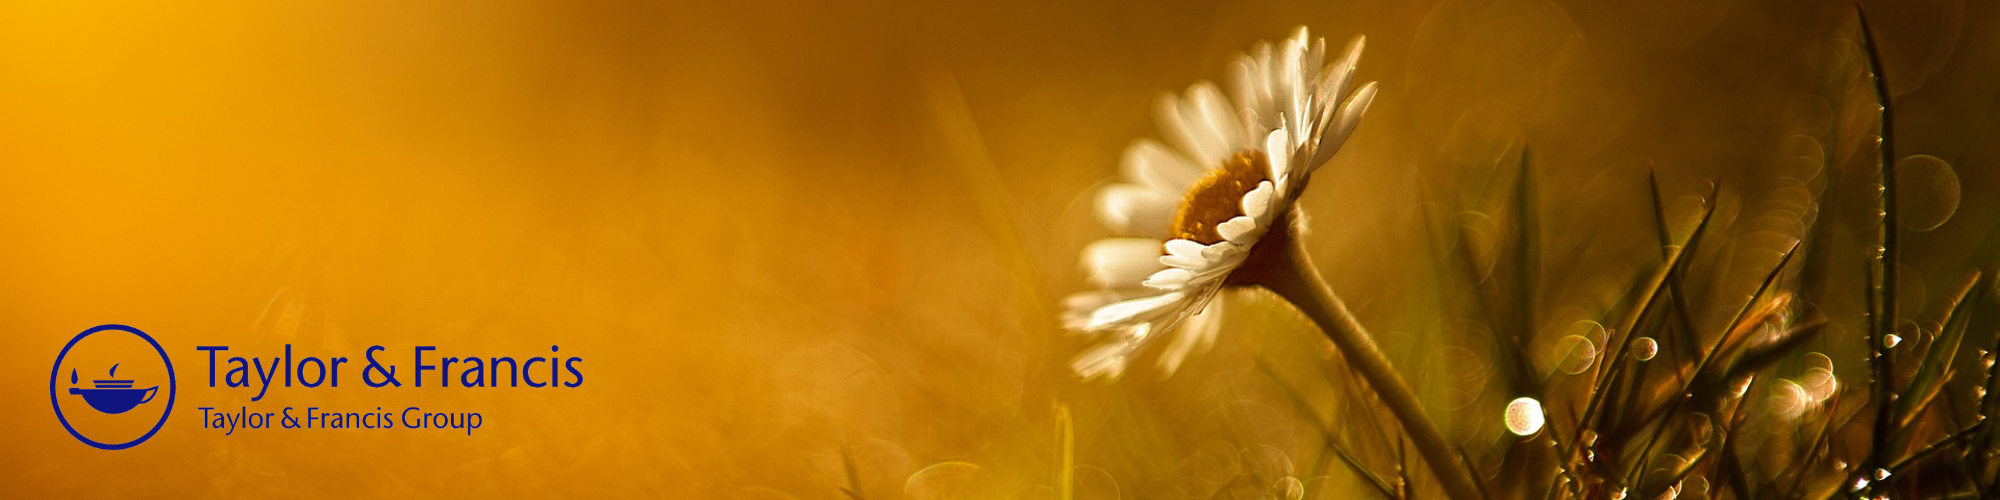 Daisy leaning into the sun against a yellow background